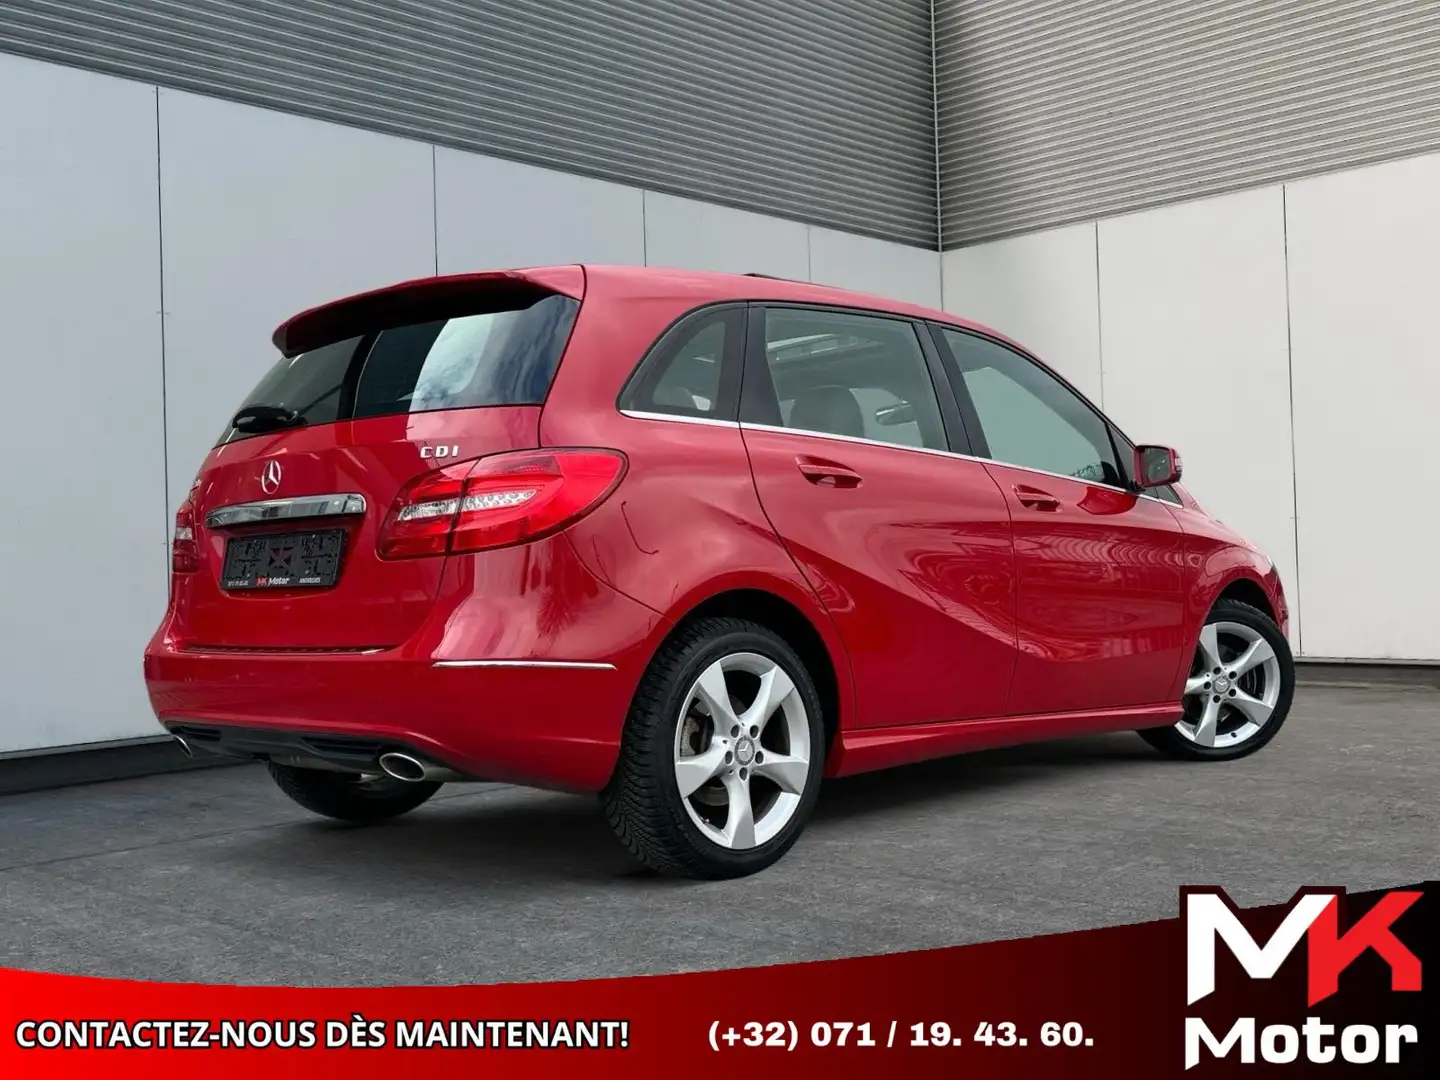 Mercedes-Benz B 180 CDI 109CV TOIT OUVRANT - GPS - PACK SPORT Rosso - 2